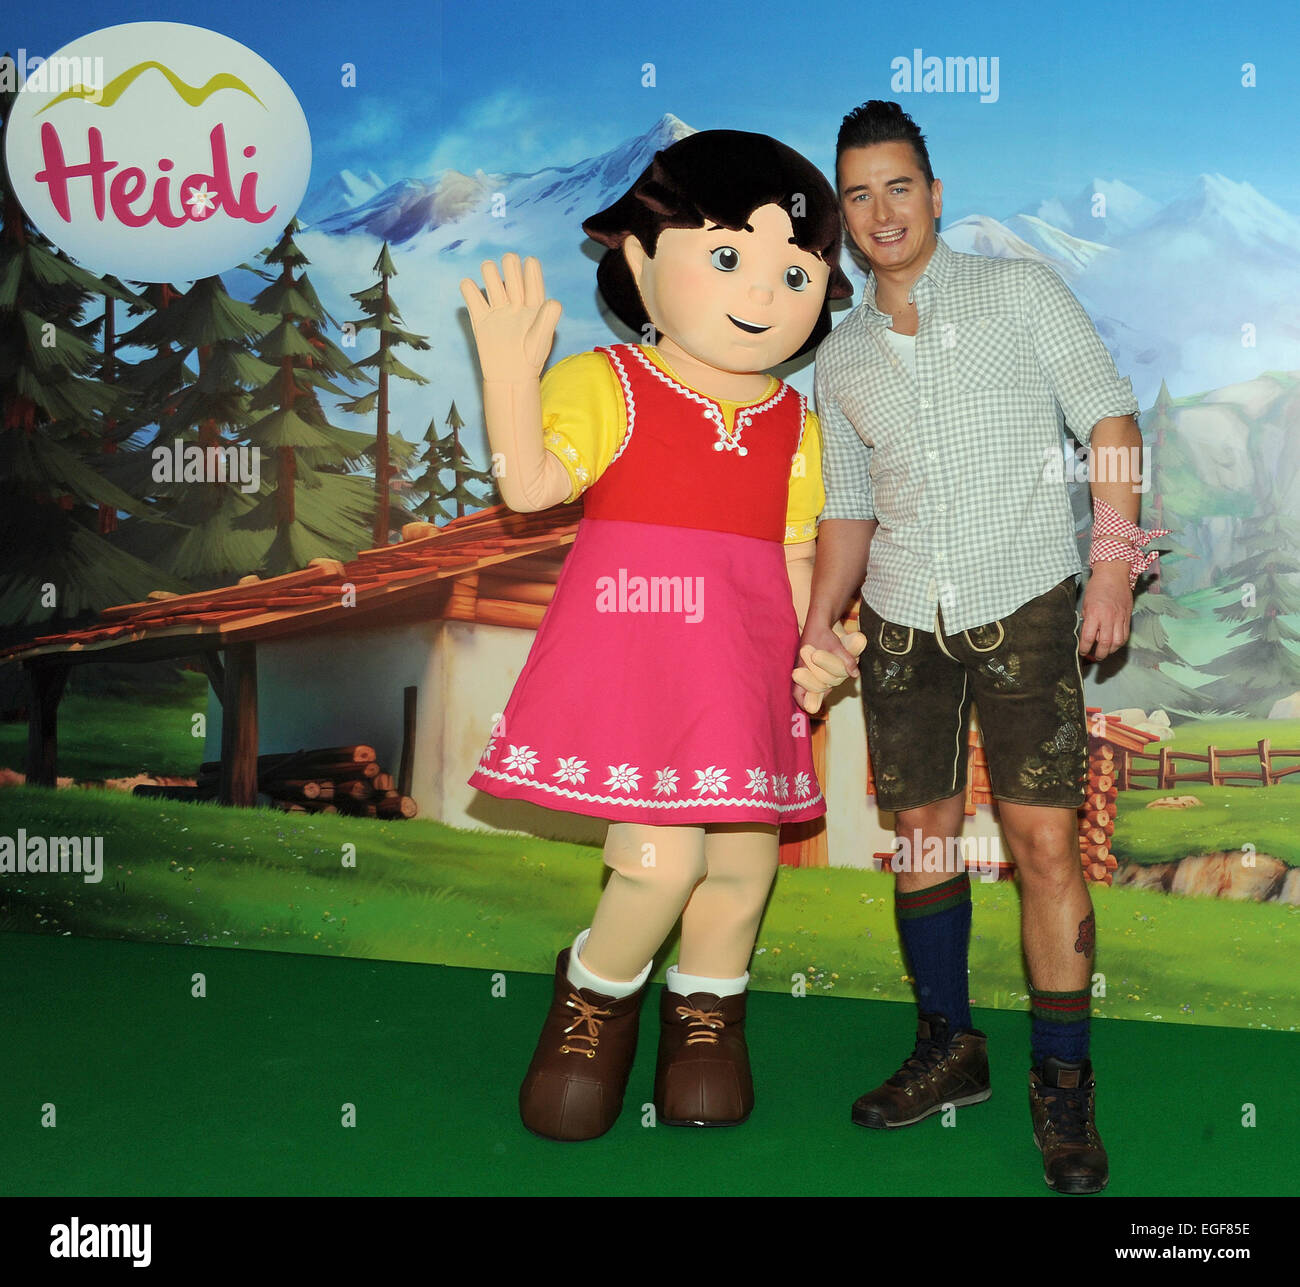 Austrian singer Andreas Gabalier records a new version of the 'Heidi' theme  song at a studio in Munich, Germany, 24 February 2015. On 6 April a  modernized version in 3D optics premieres